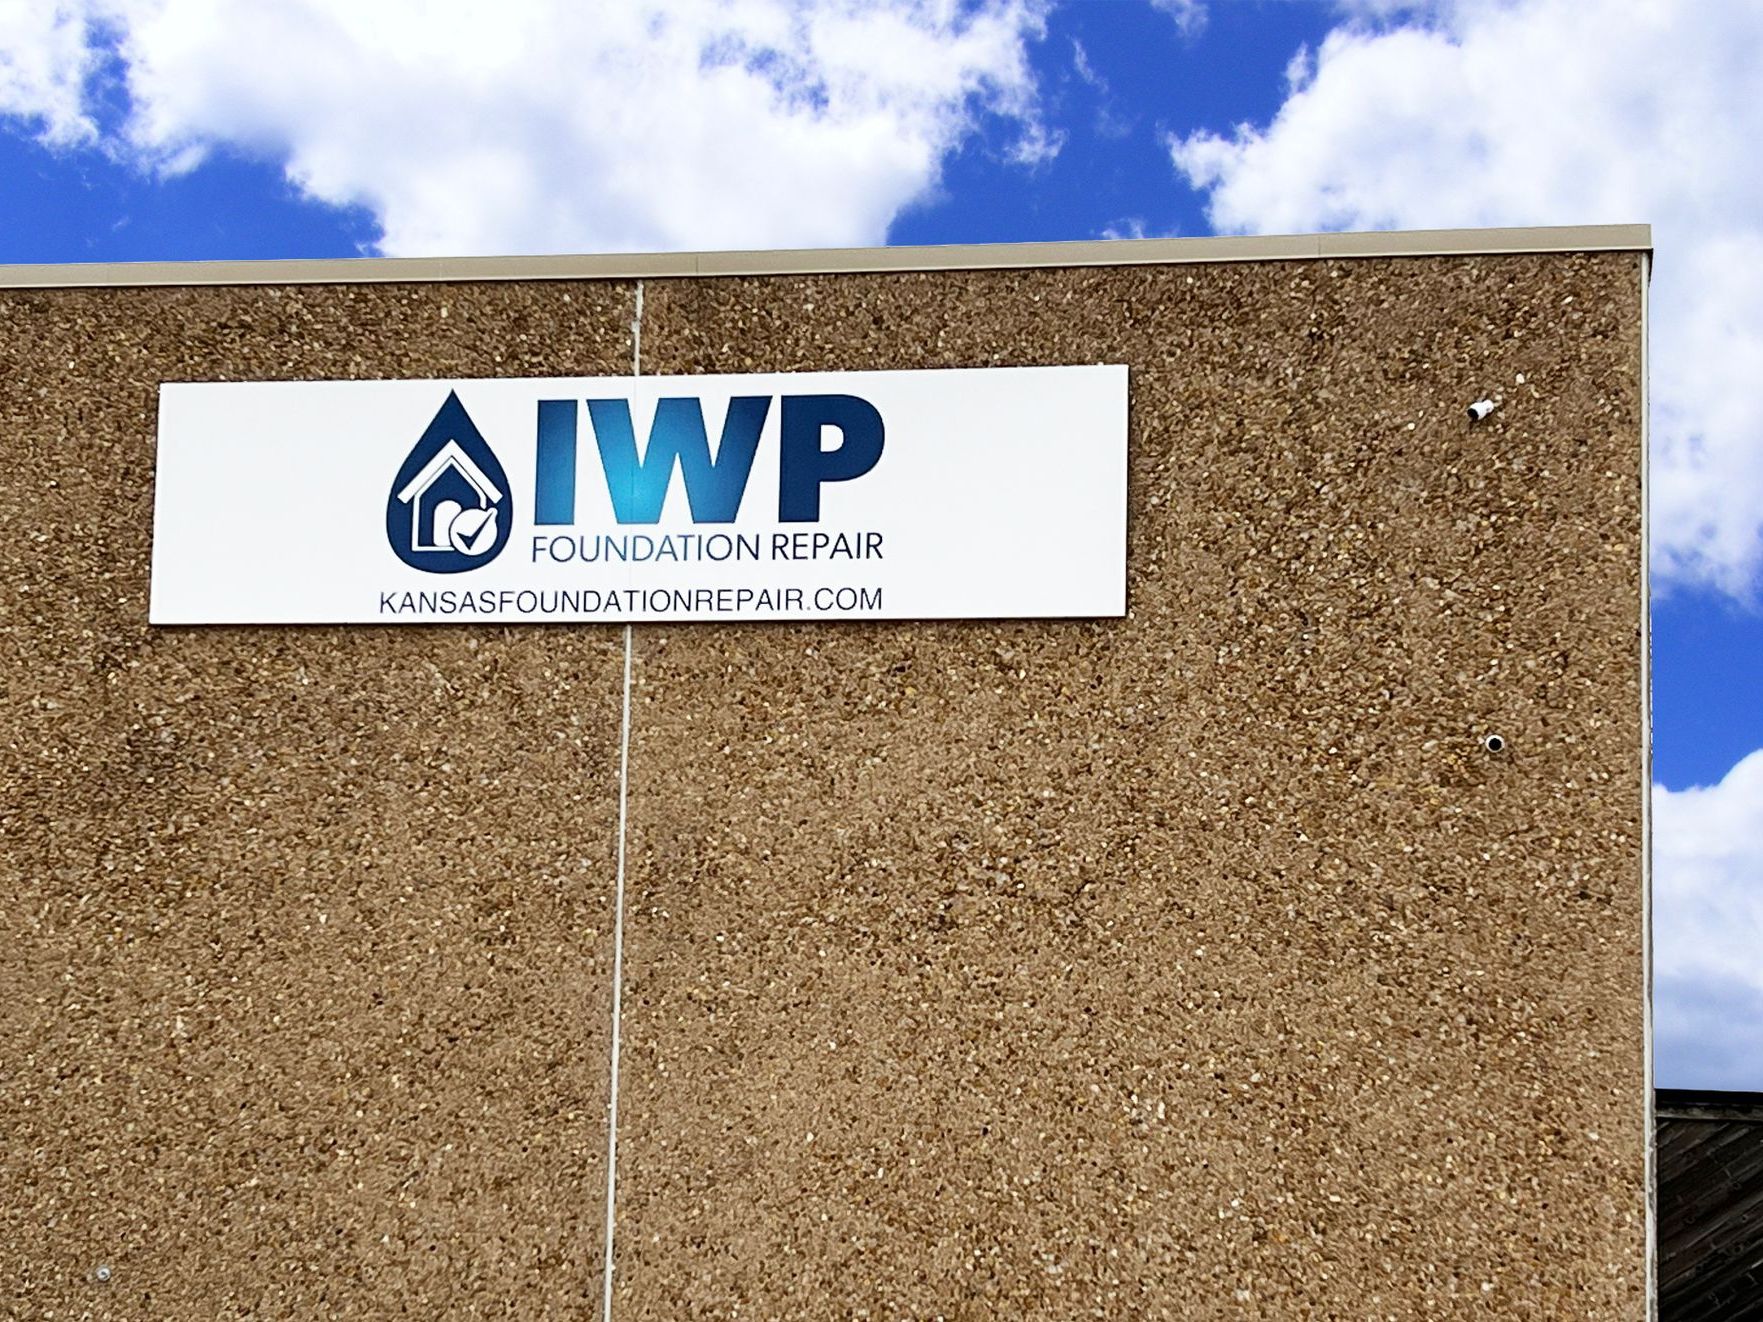 outside photo of IWP building